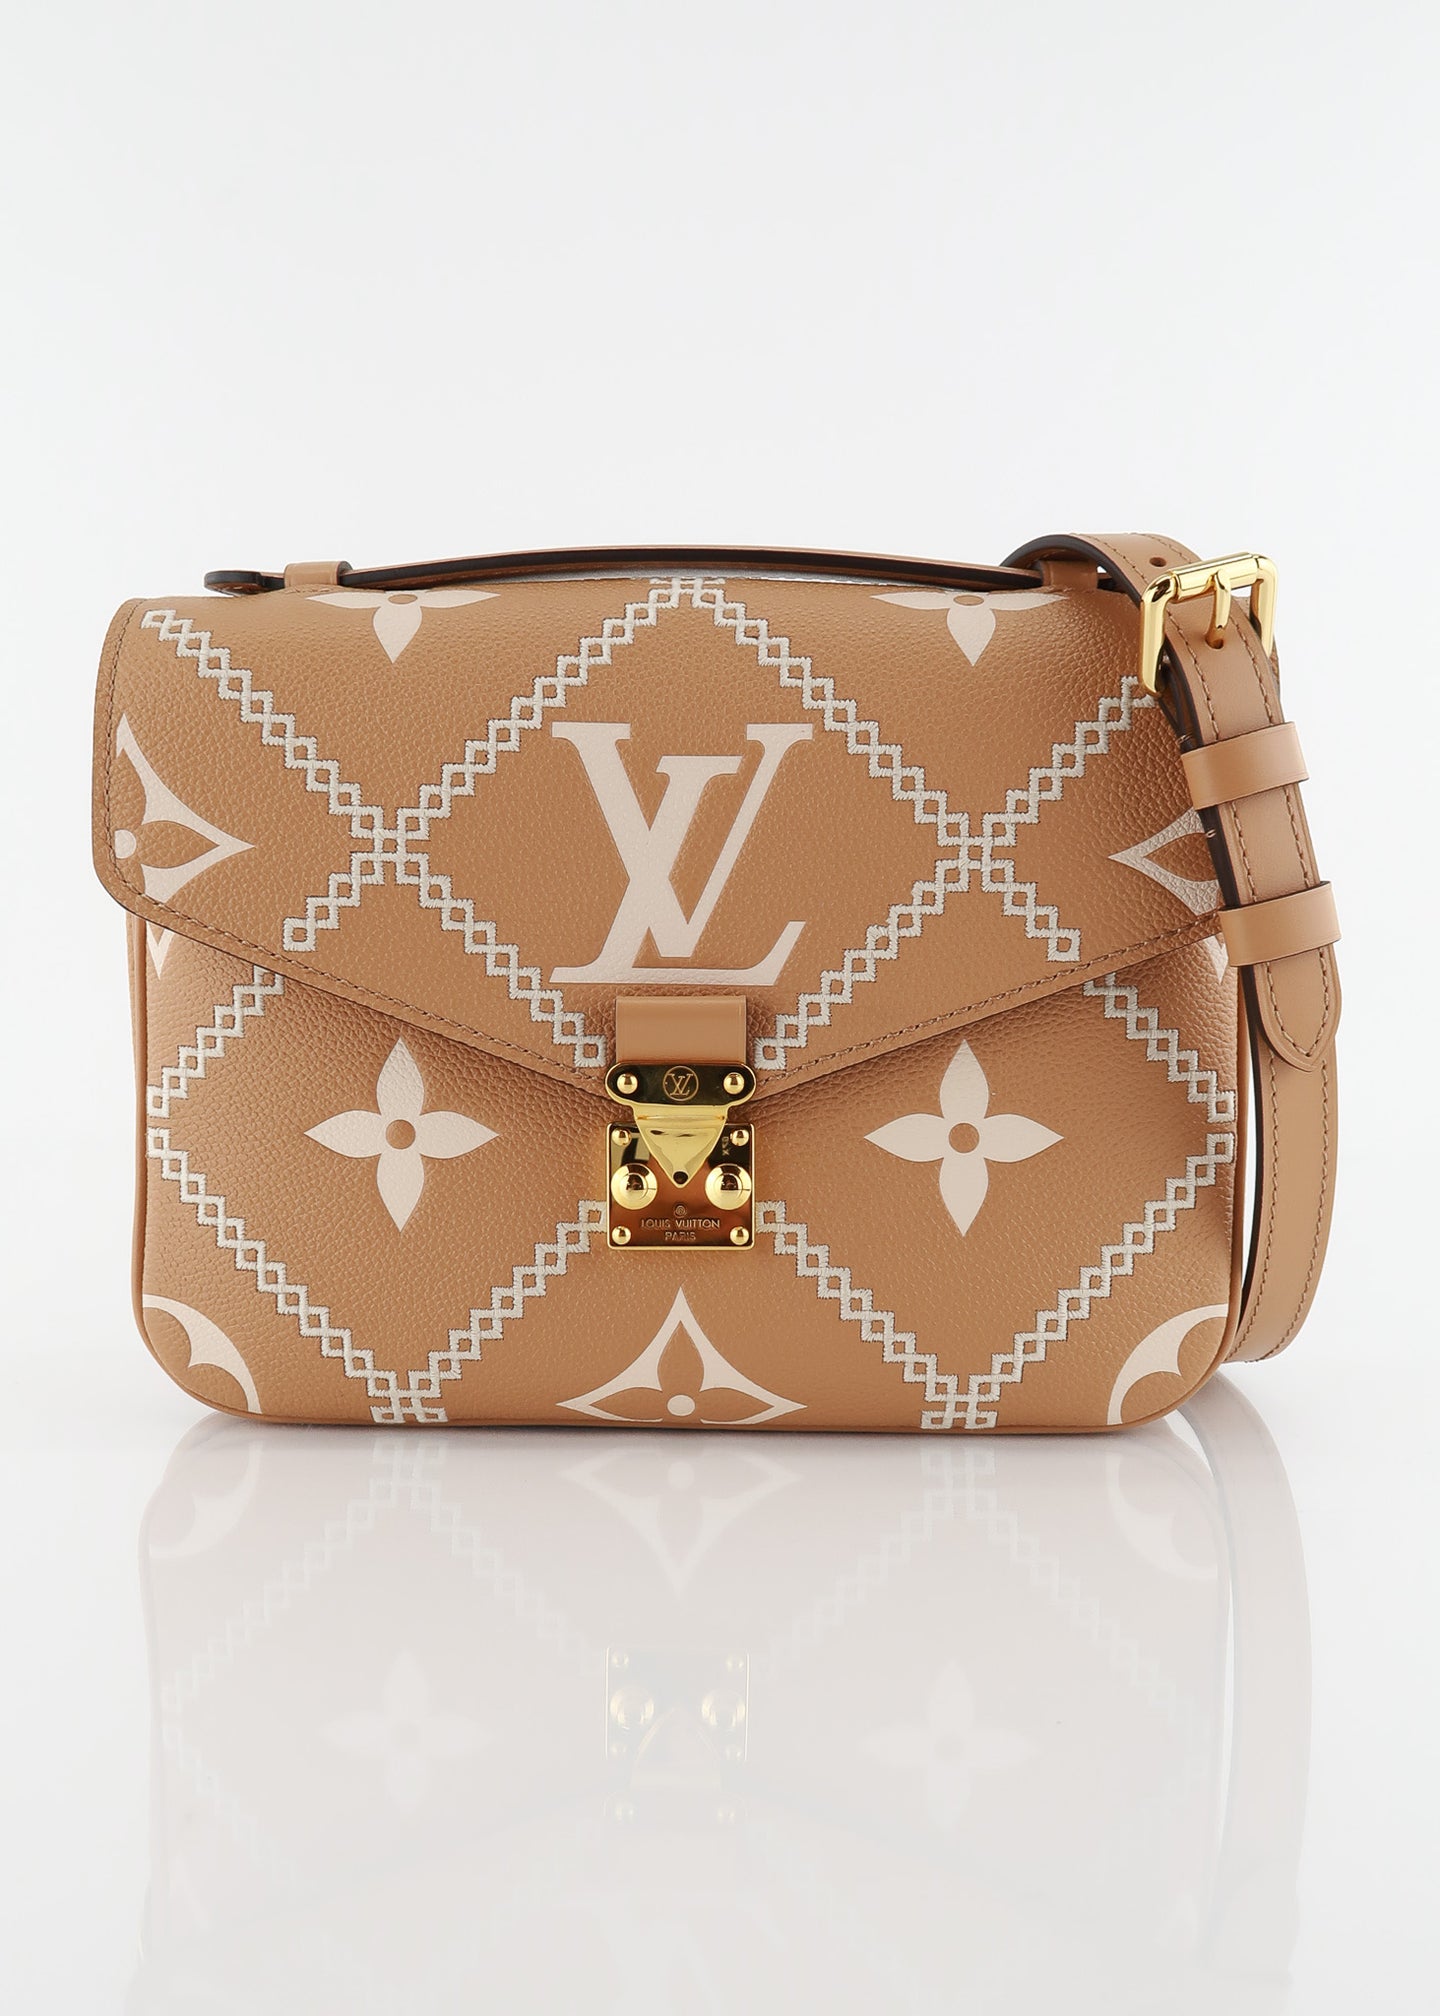 Louis Vuitton - Authenticated Metis Handbag - Leather Brown for Women, Very Good Condition